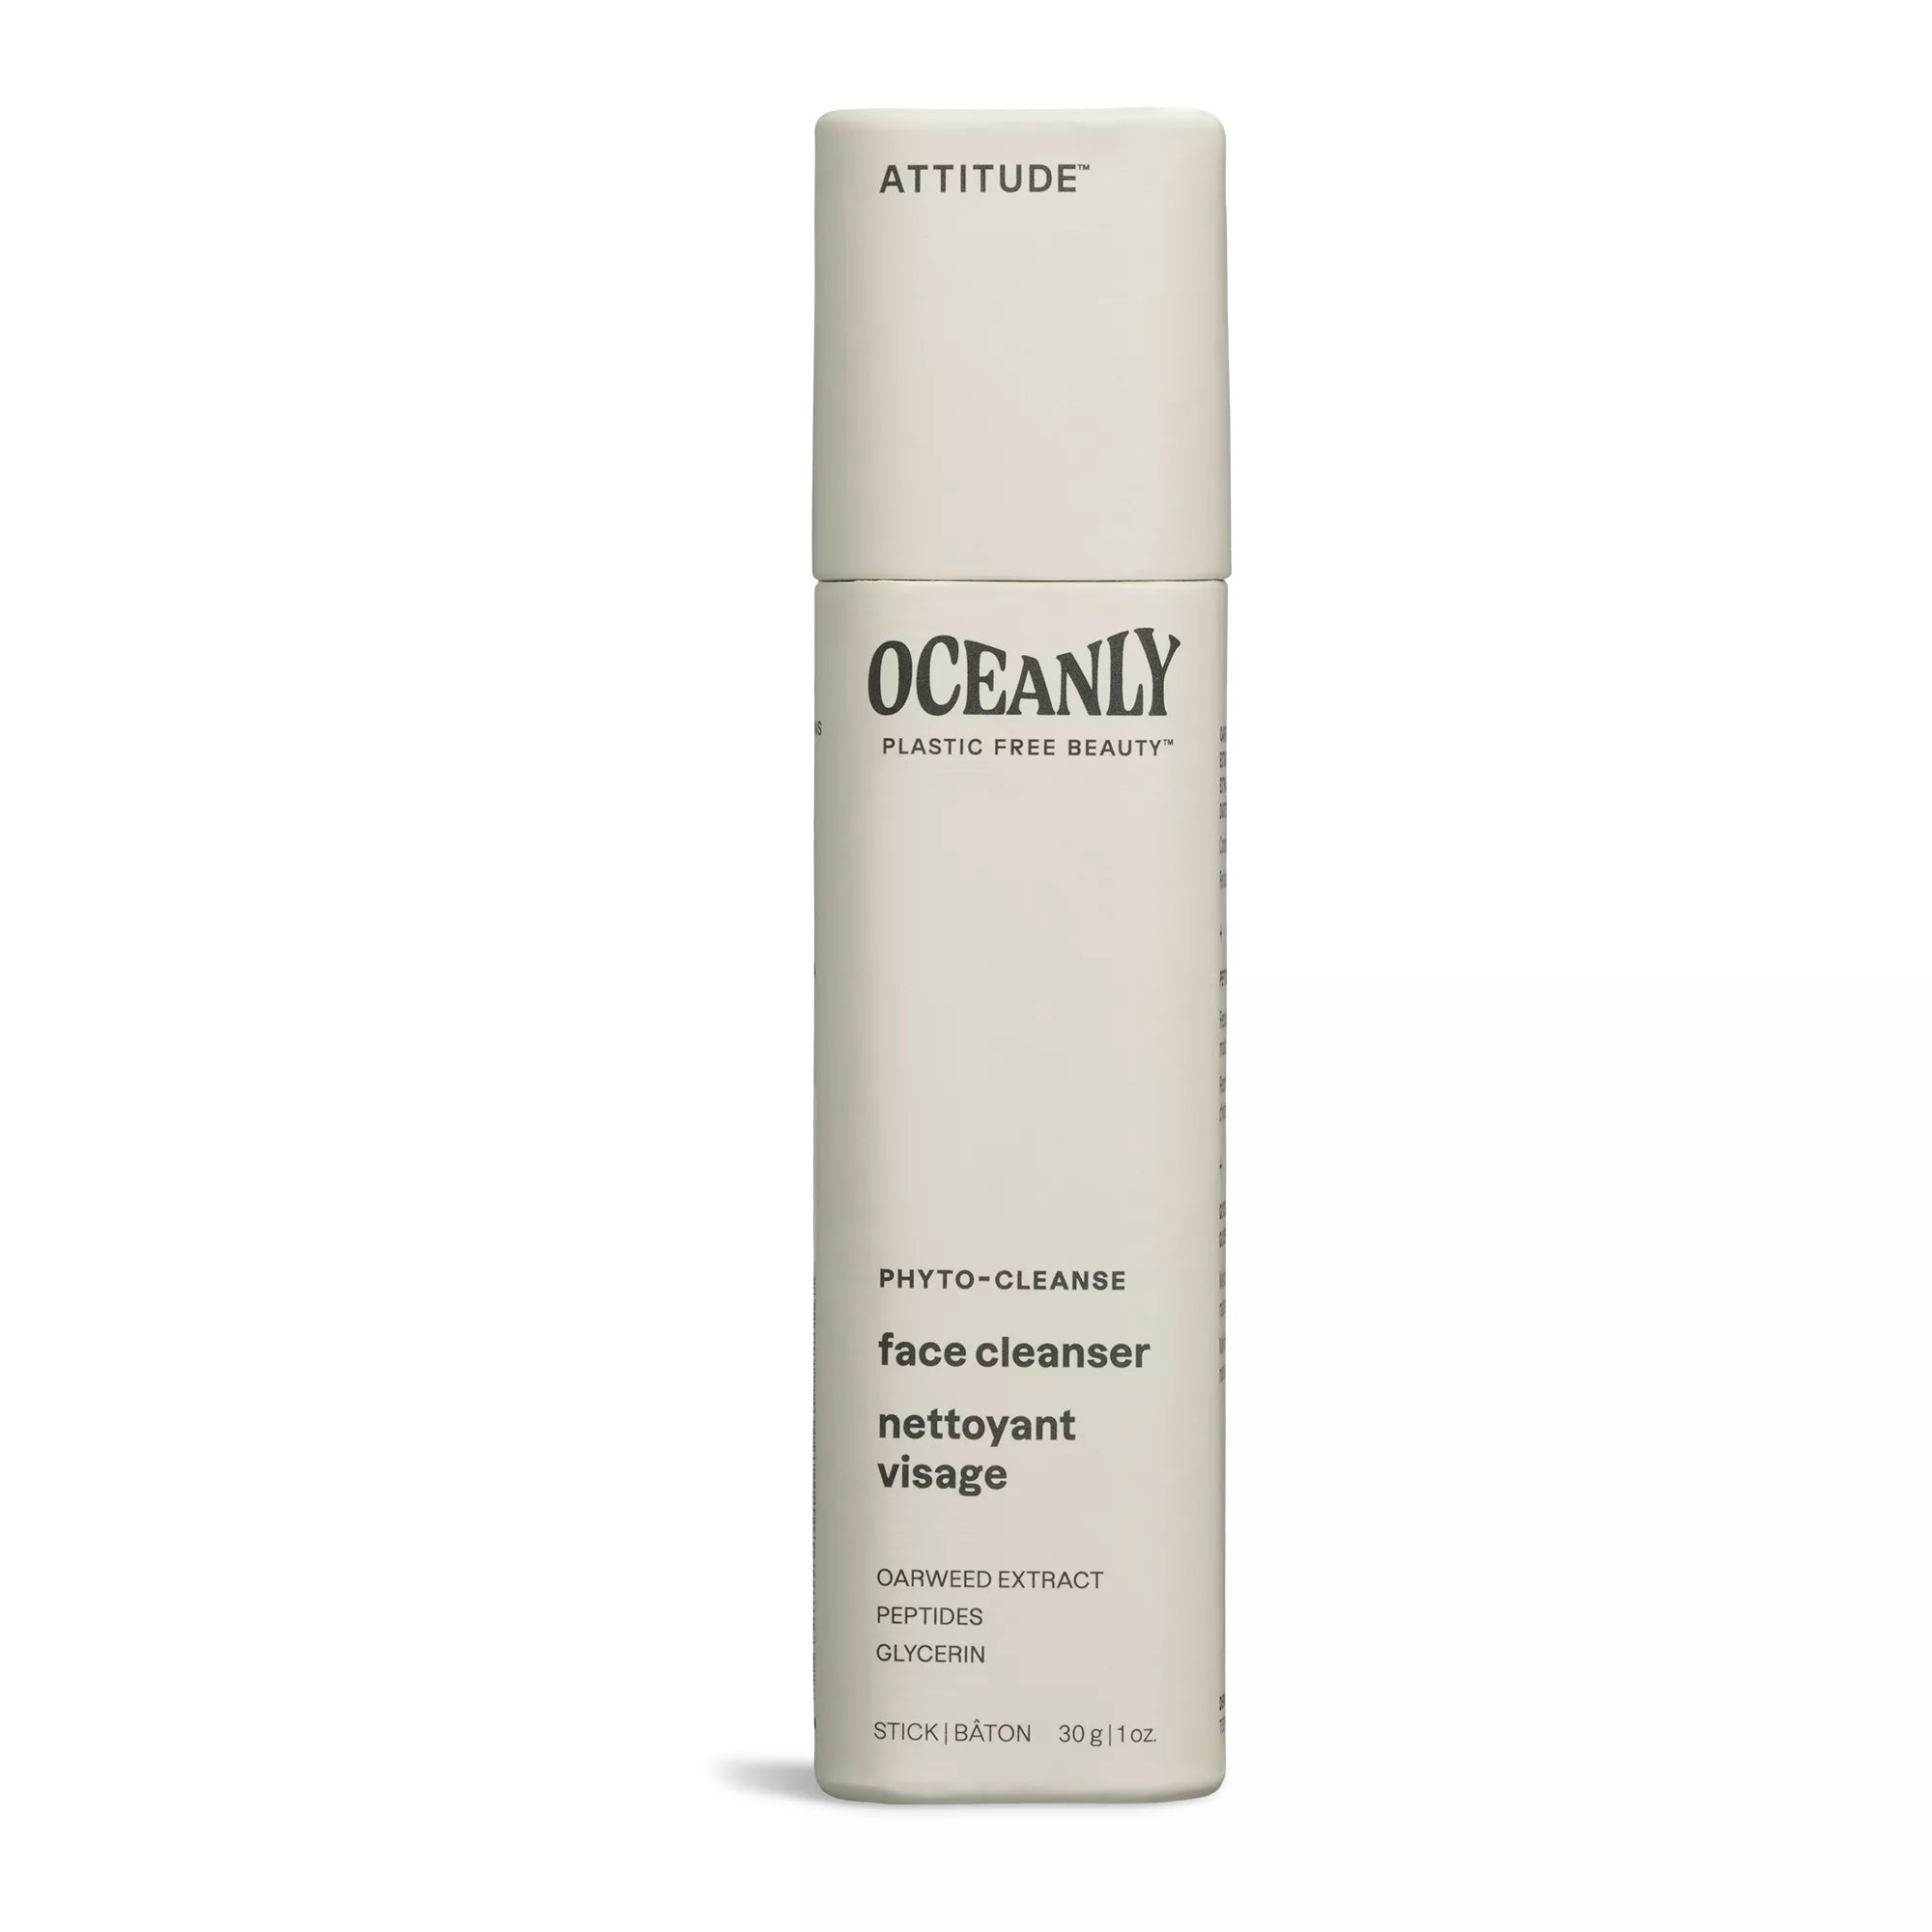 ATTITUDE Oceanly Phyto-Cleanse Face Cleanser Unscented 30g 16064_en? Unscented 30g